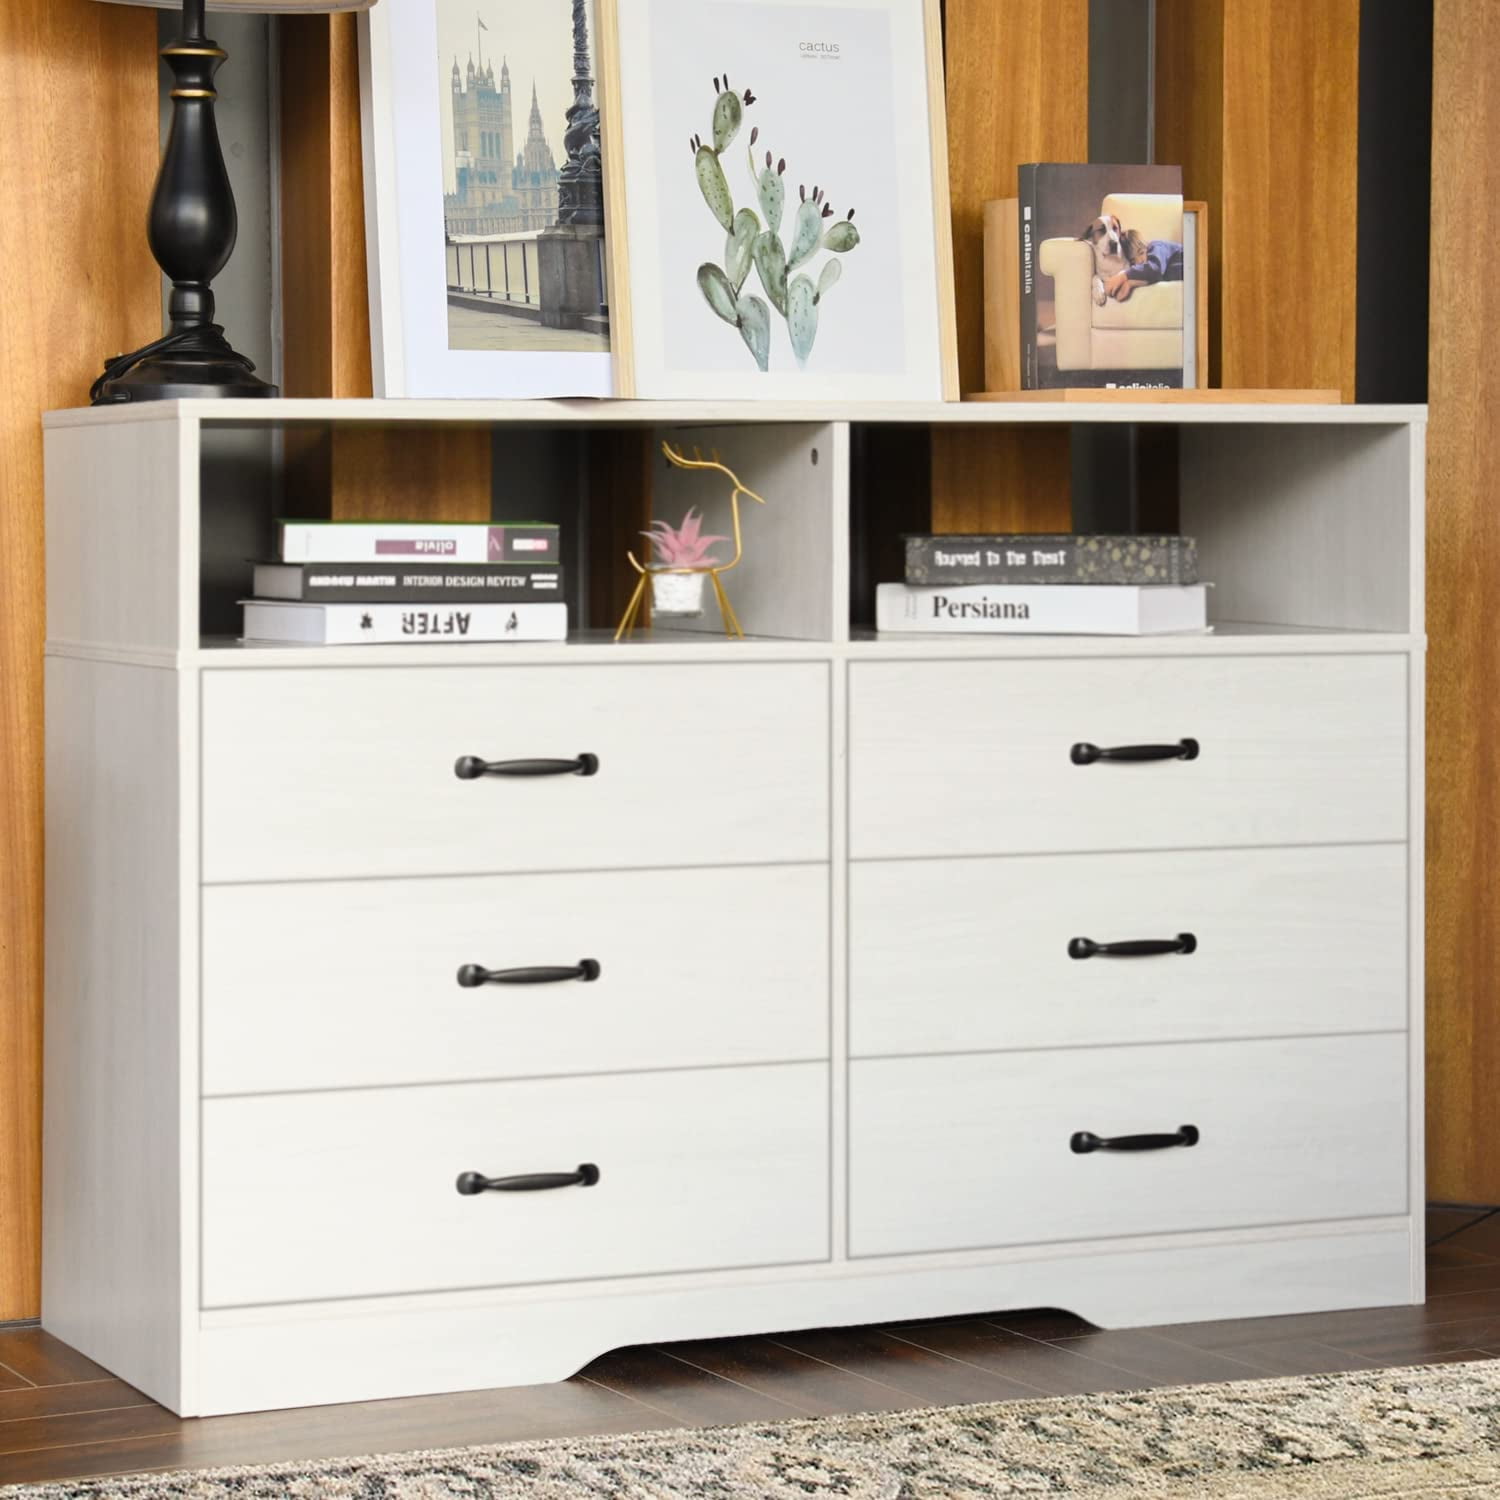 Segmart White 4 Drawer Dresser for Small Space, Wood Storage Cabinet for  Living Room, Chest of Drawers with Metal Handle for Bedroom 